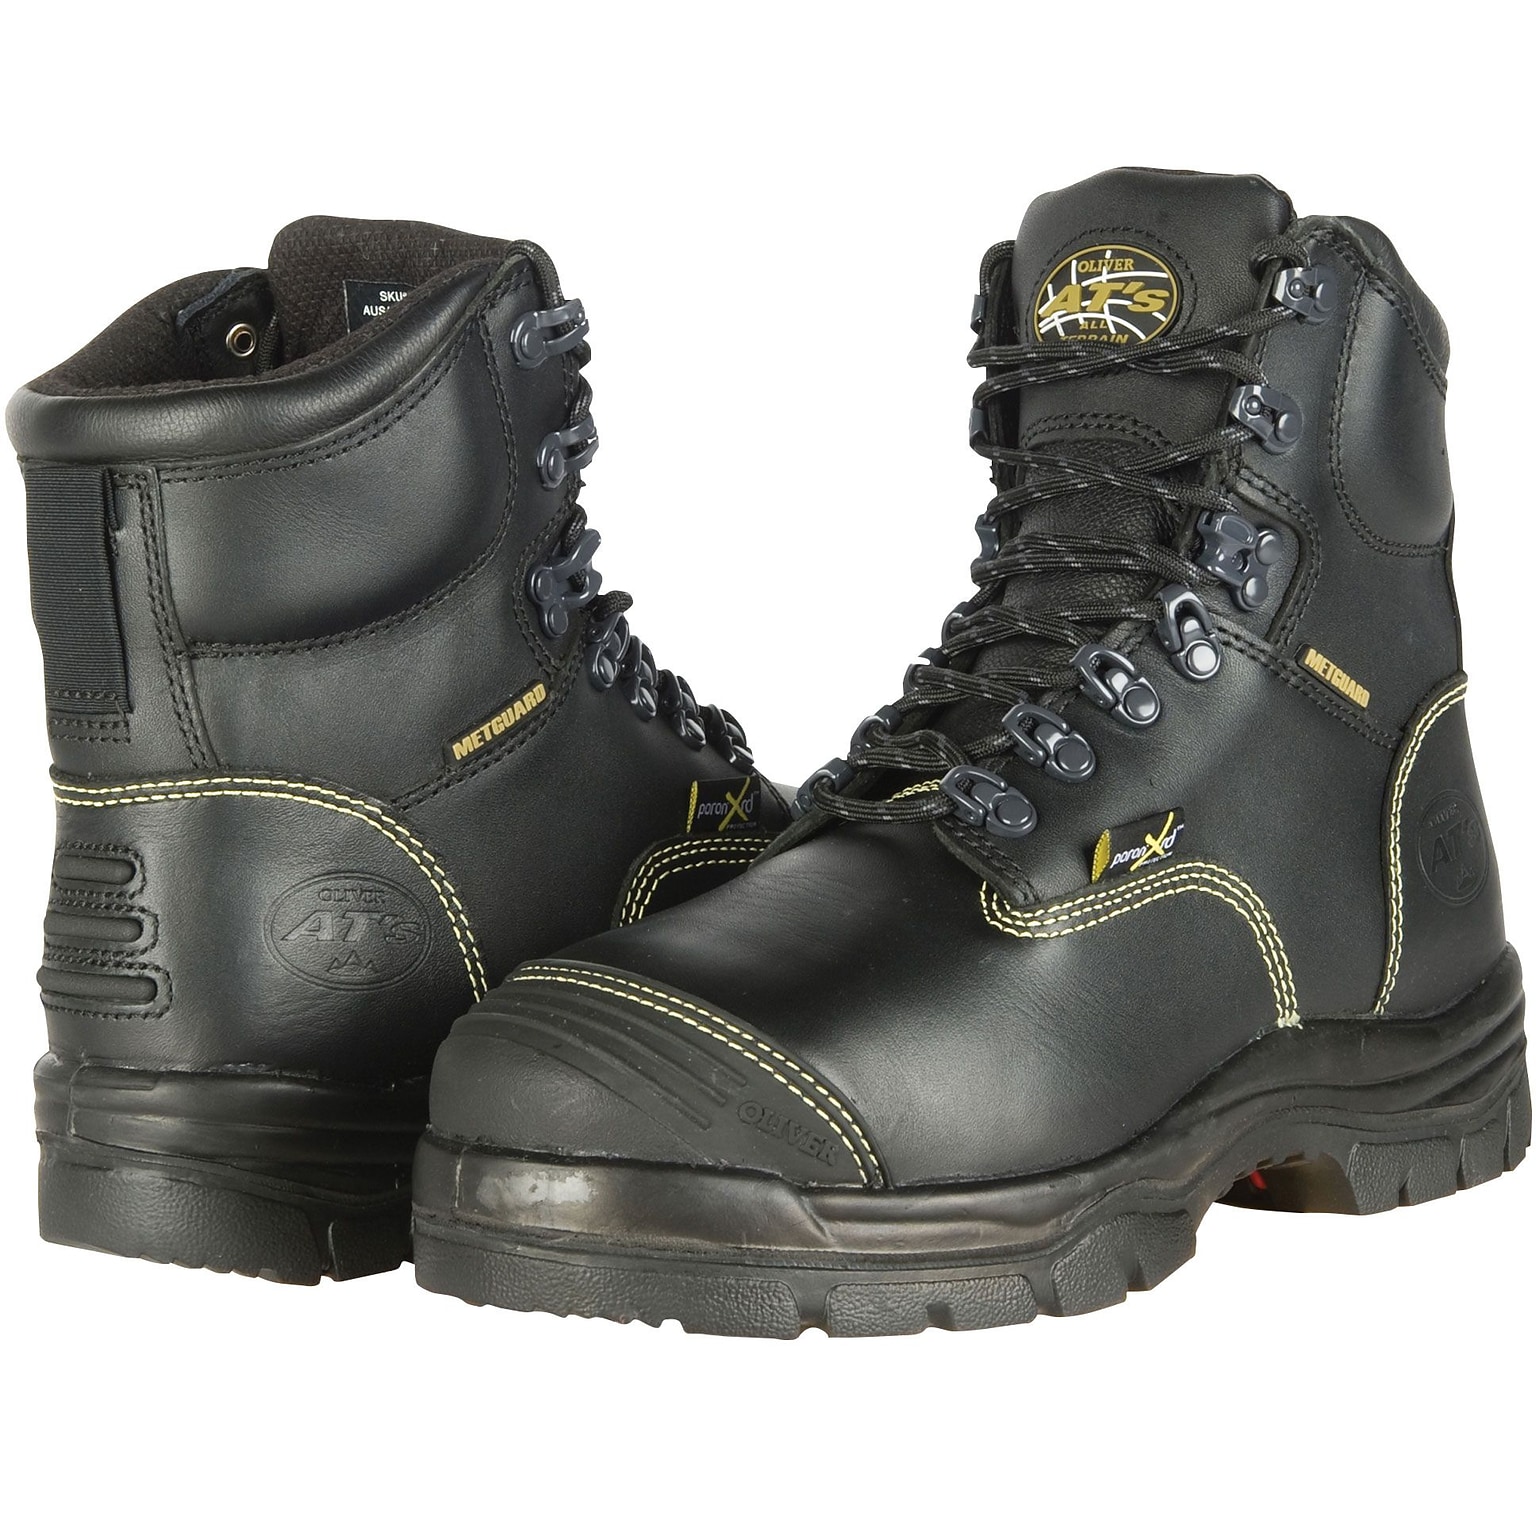 Oliver by Honeywell Metatarsal Guard Mining Work Boots, Black, Size 6(821-55246BLK070)